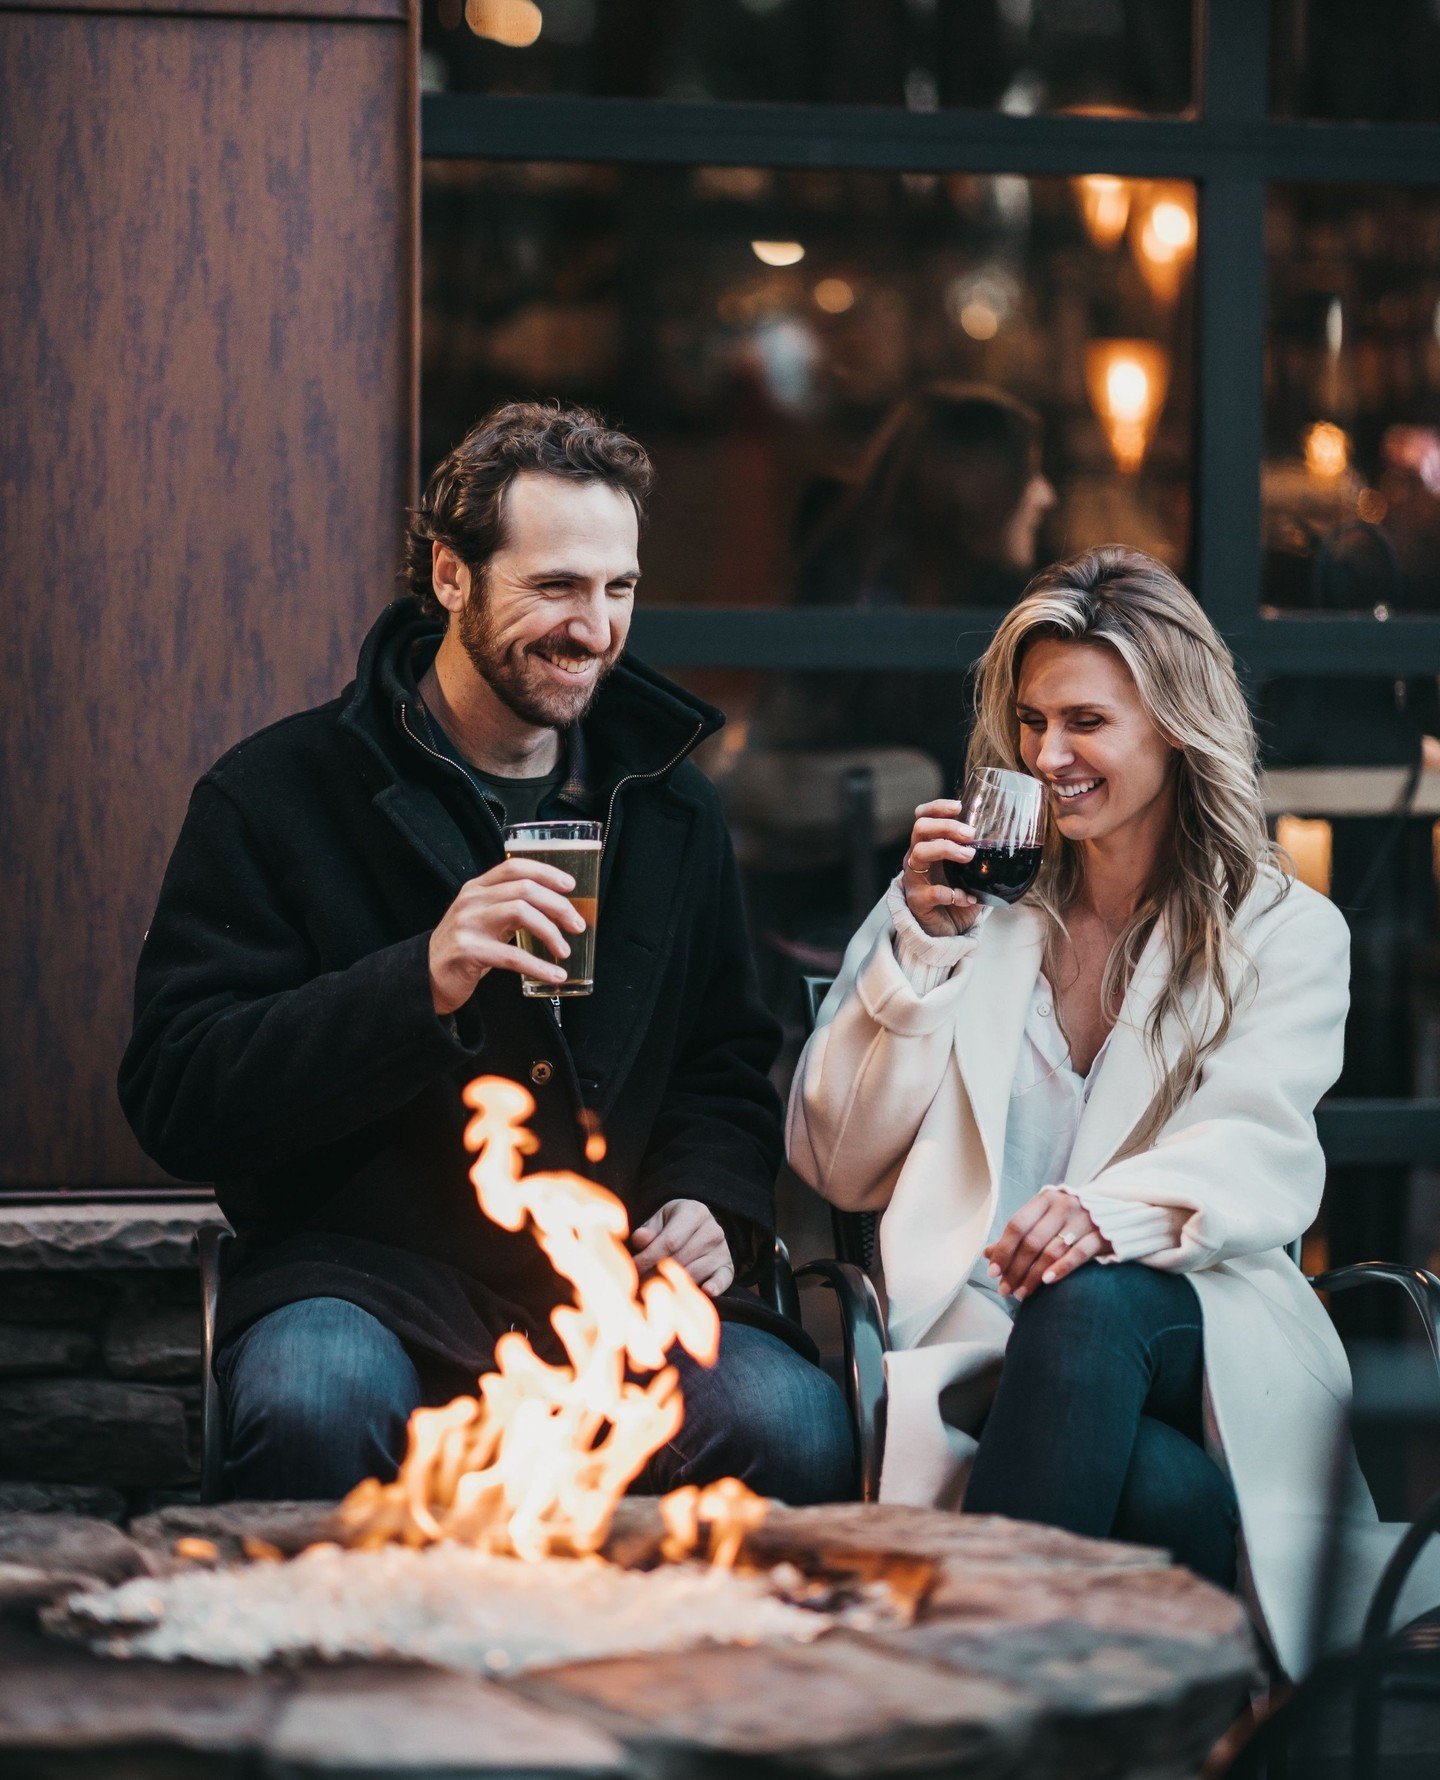 While some people prefer to climb mountains, others prefer to snuggle up next to the fire with a good glass of wine. We like to do both.